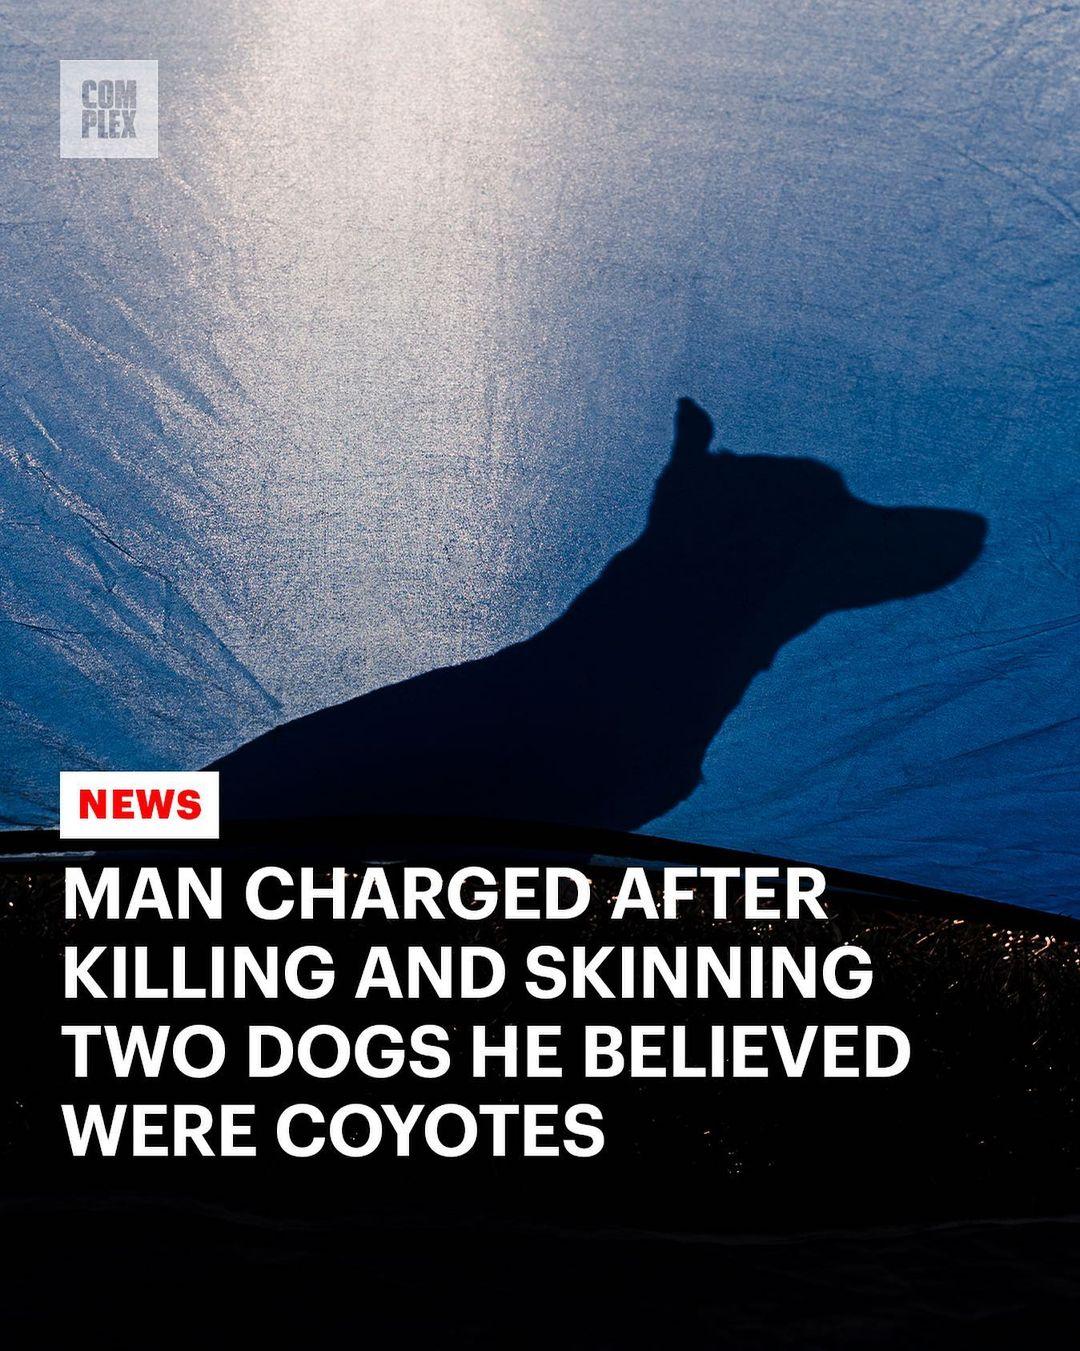 class="content__text"
 61-year-old hunter Michael Konschak has been charged after he admitted to killing and skinning two German shepherds he believed were coyotes. Full story 🔗 link in bio. 
 